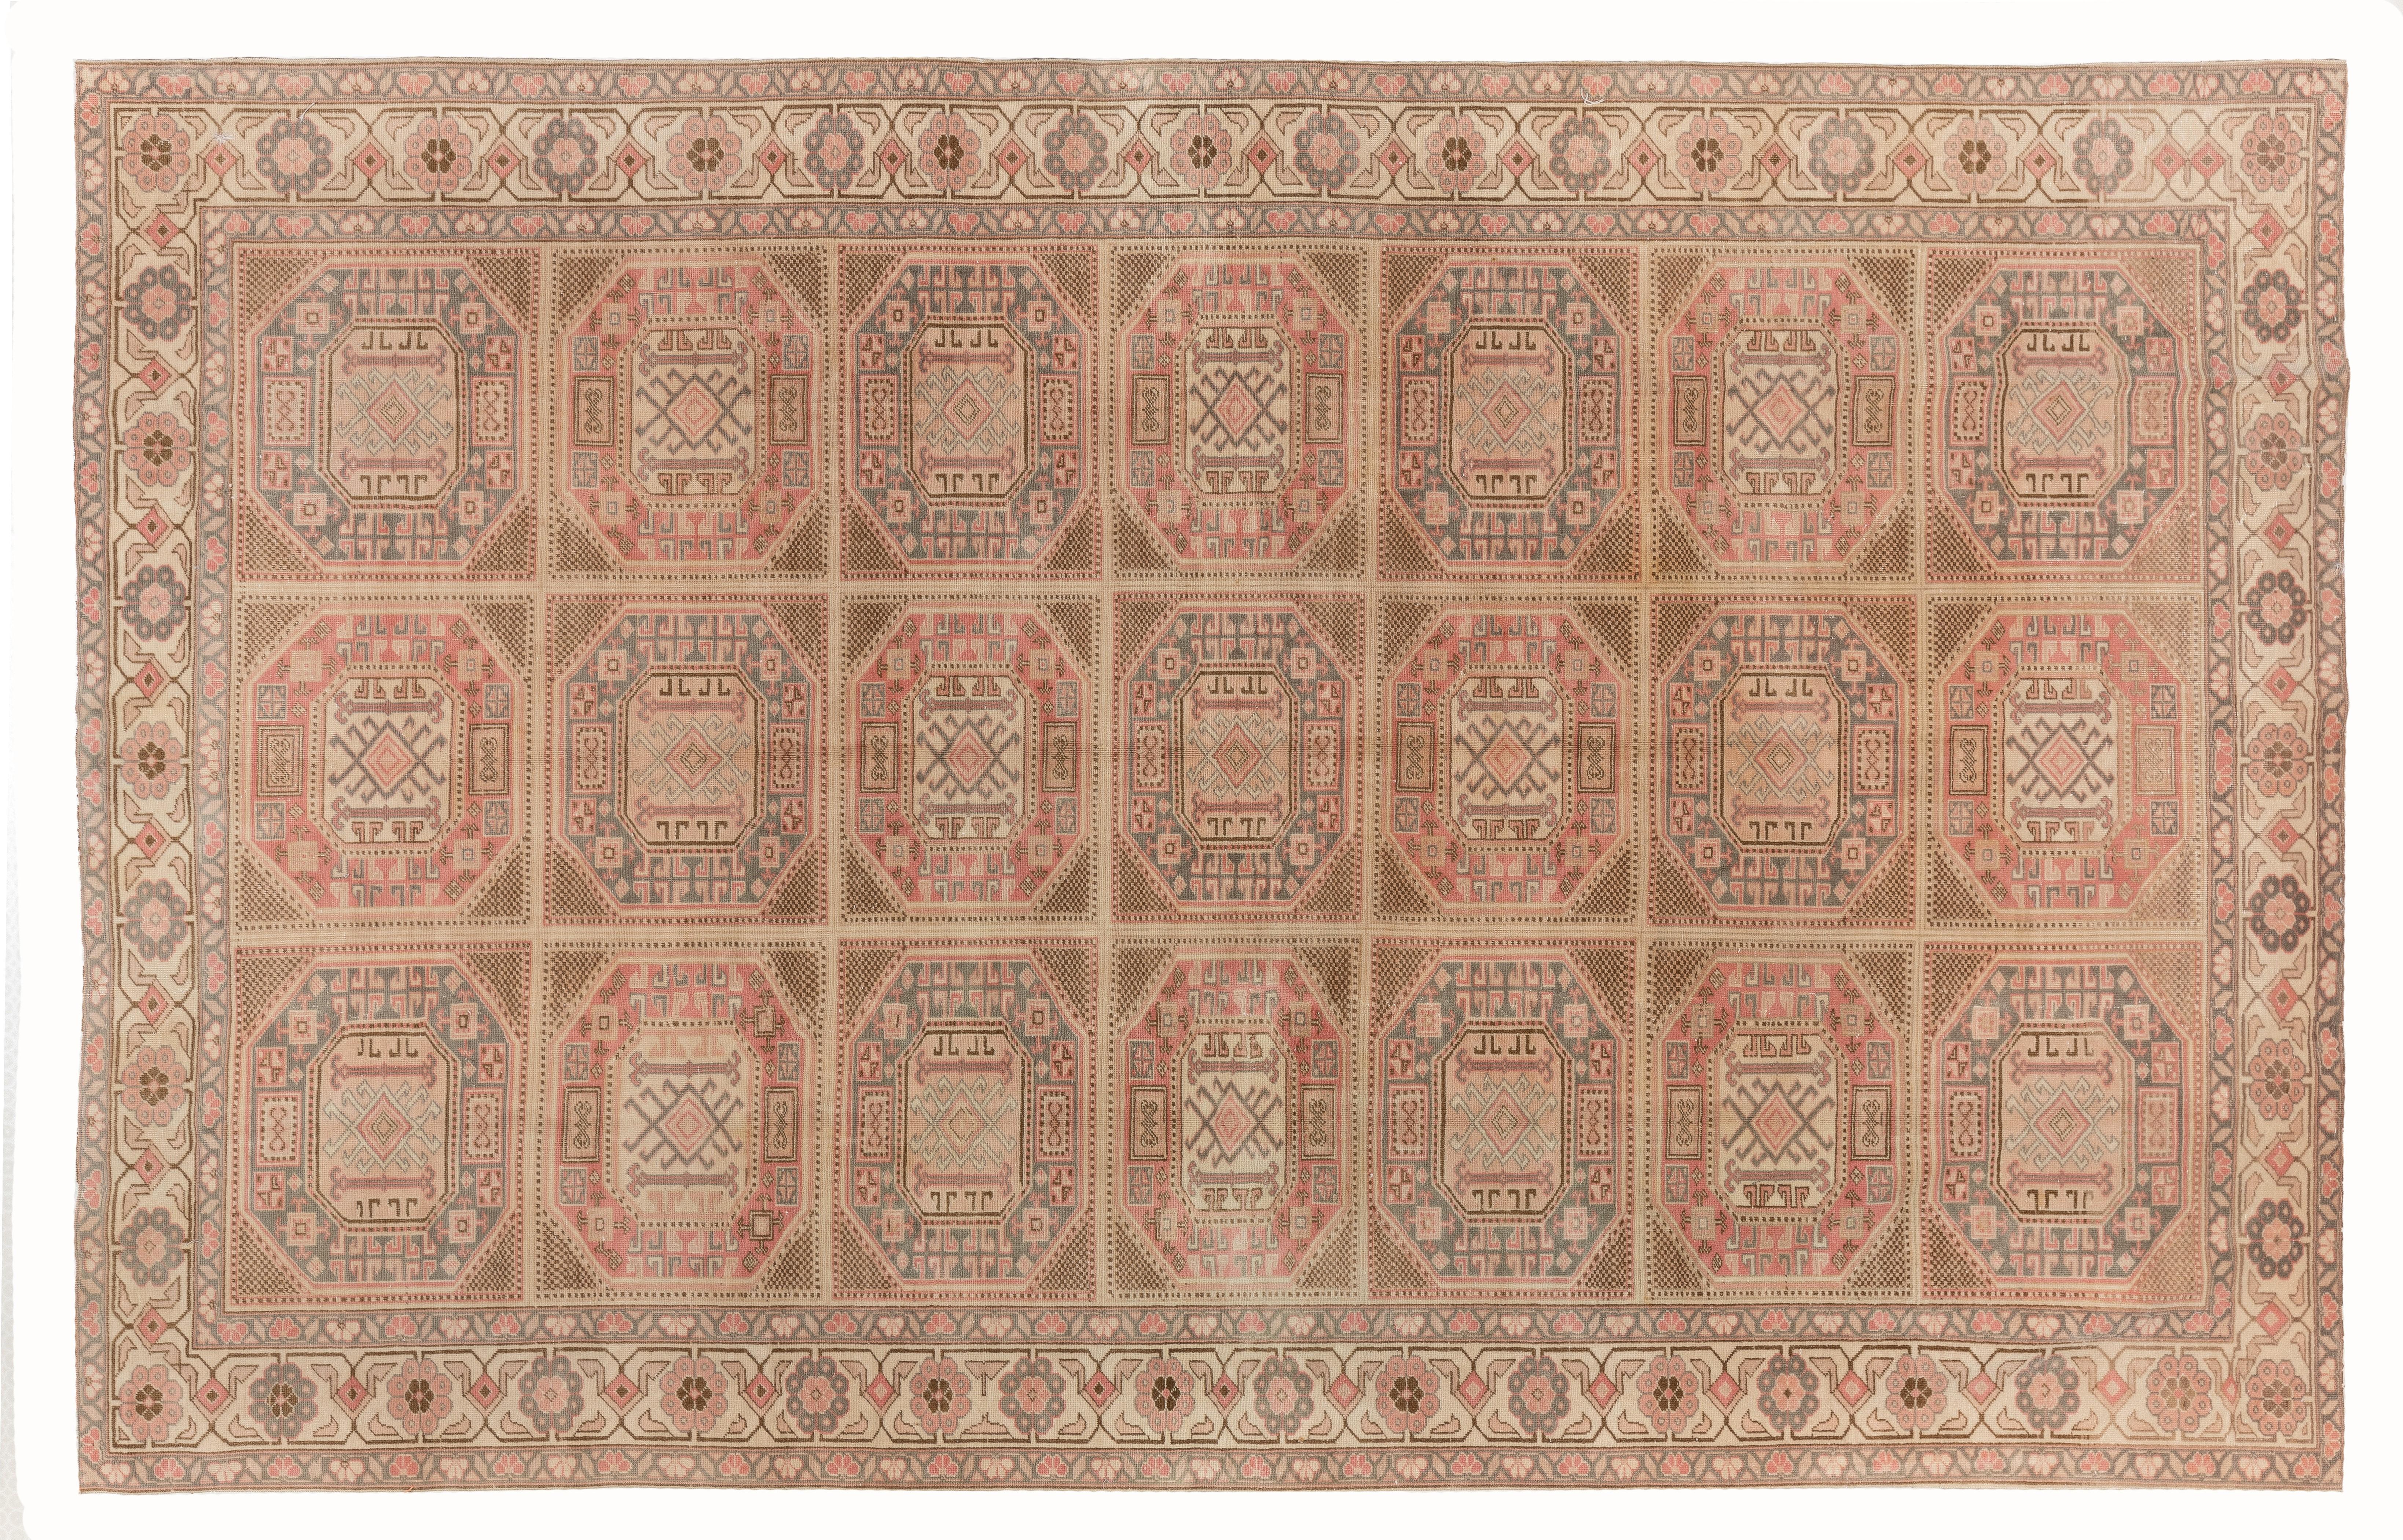 Country 6.6x9.7 Ft Hand Knotted Vintage Turkish Kysari Rug. Muted Colors, Wool Pile For Sale